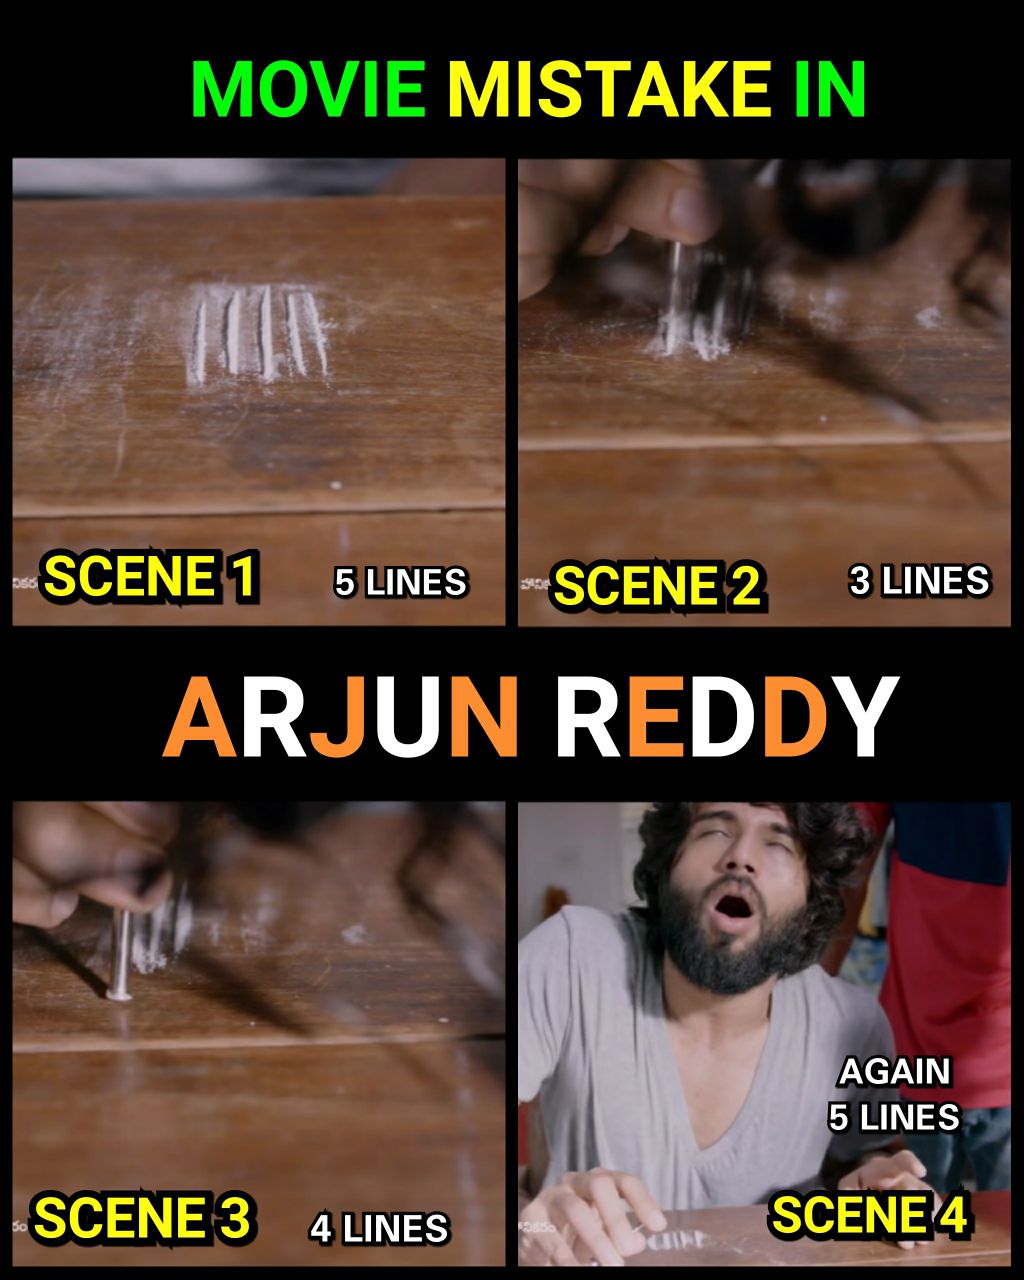 Lol What a funny mistake from Arjun Reddy movie — Steemit